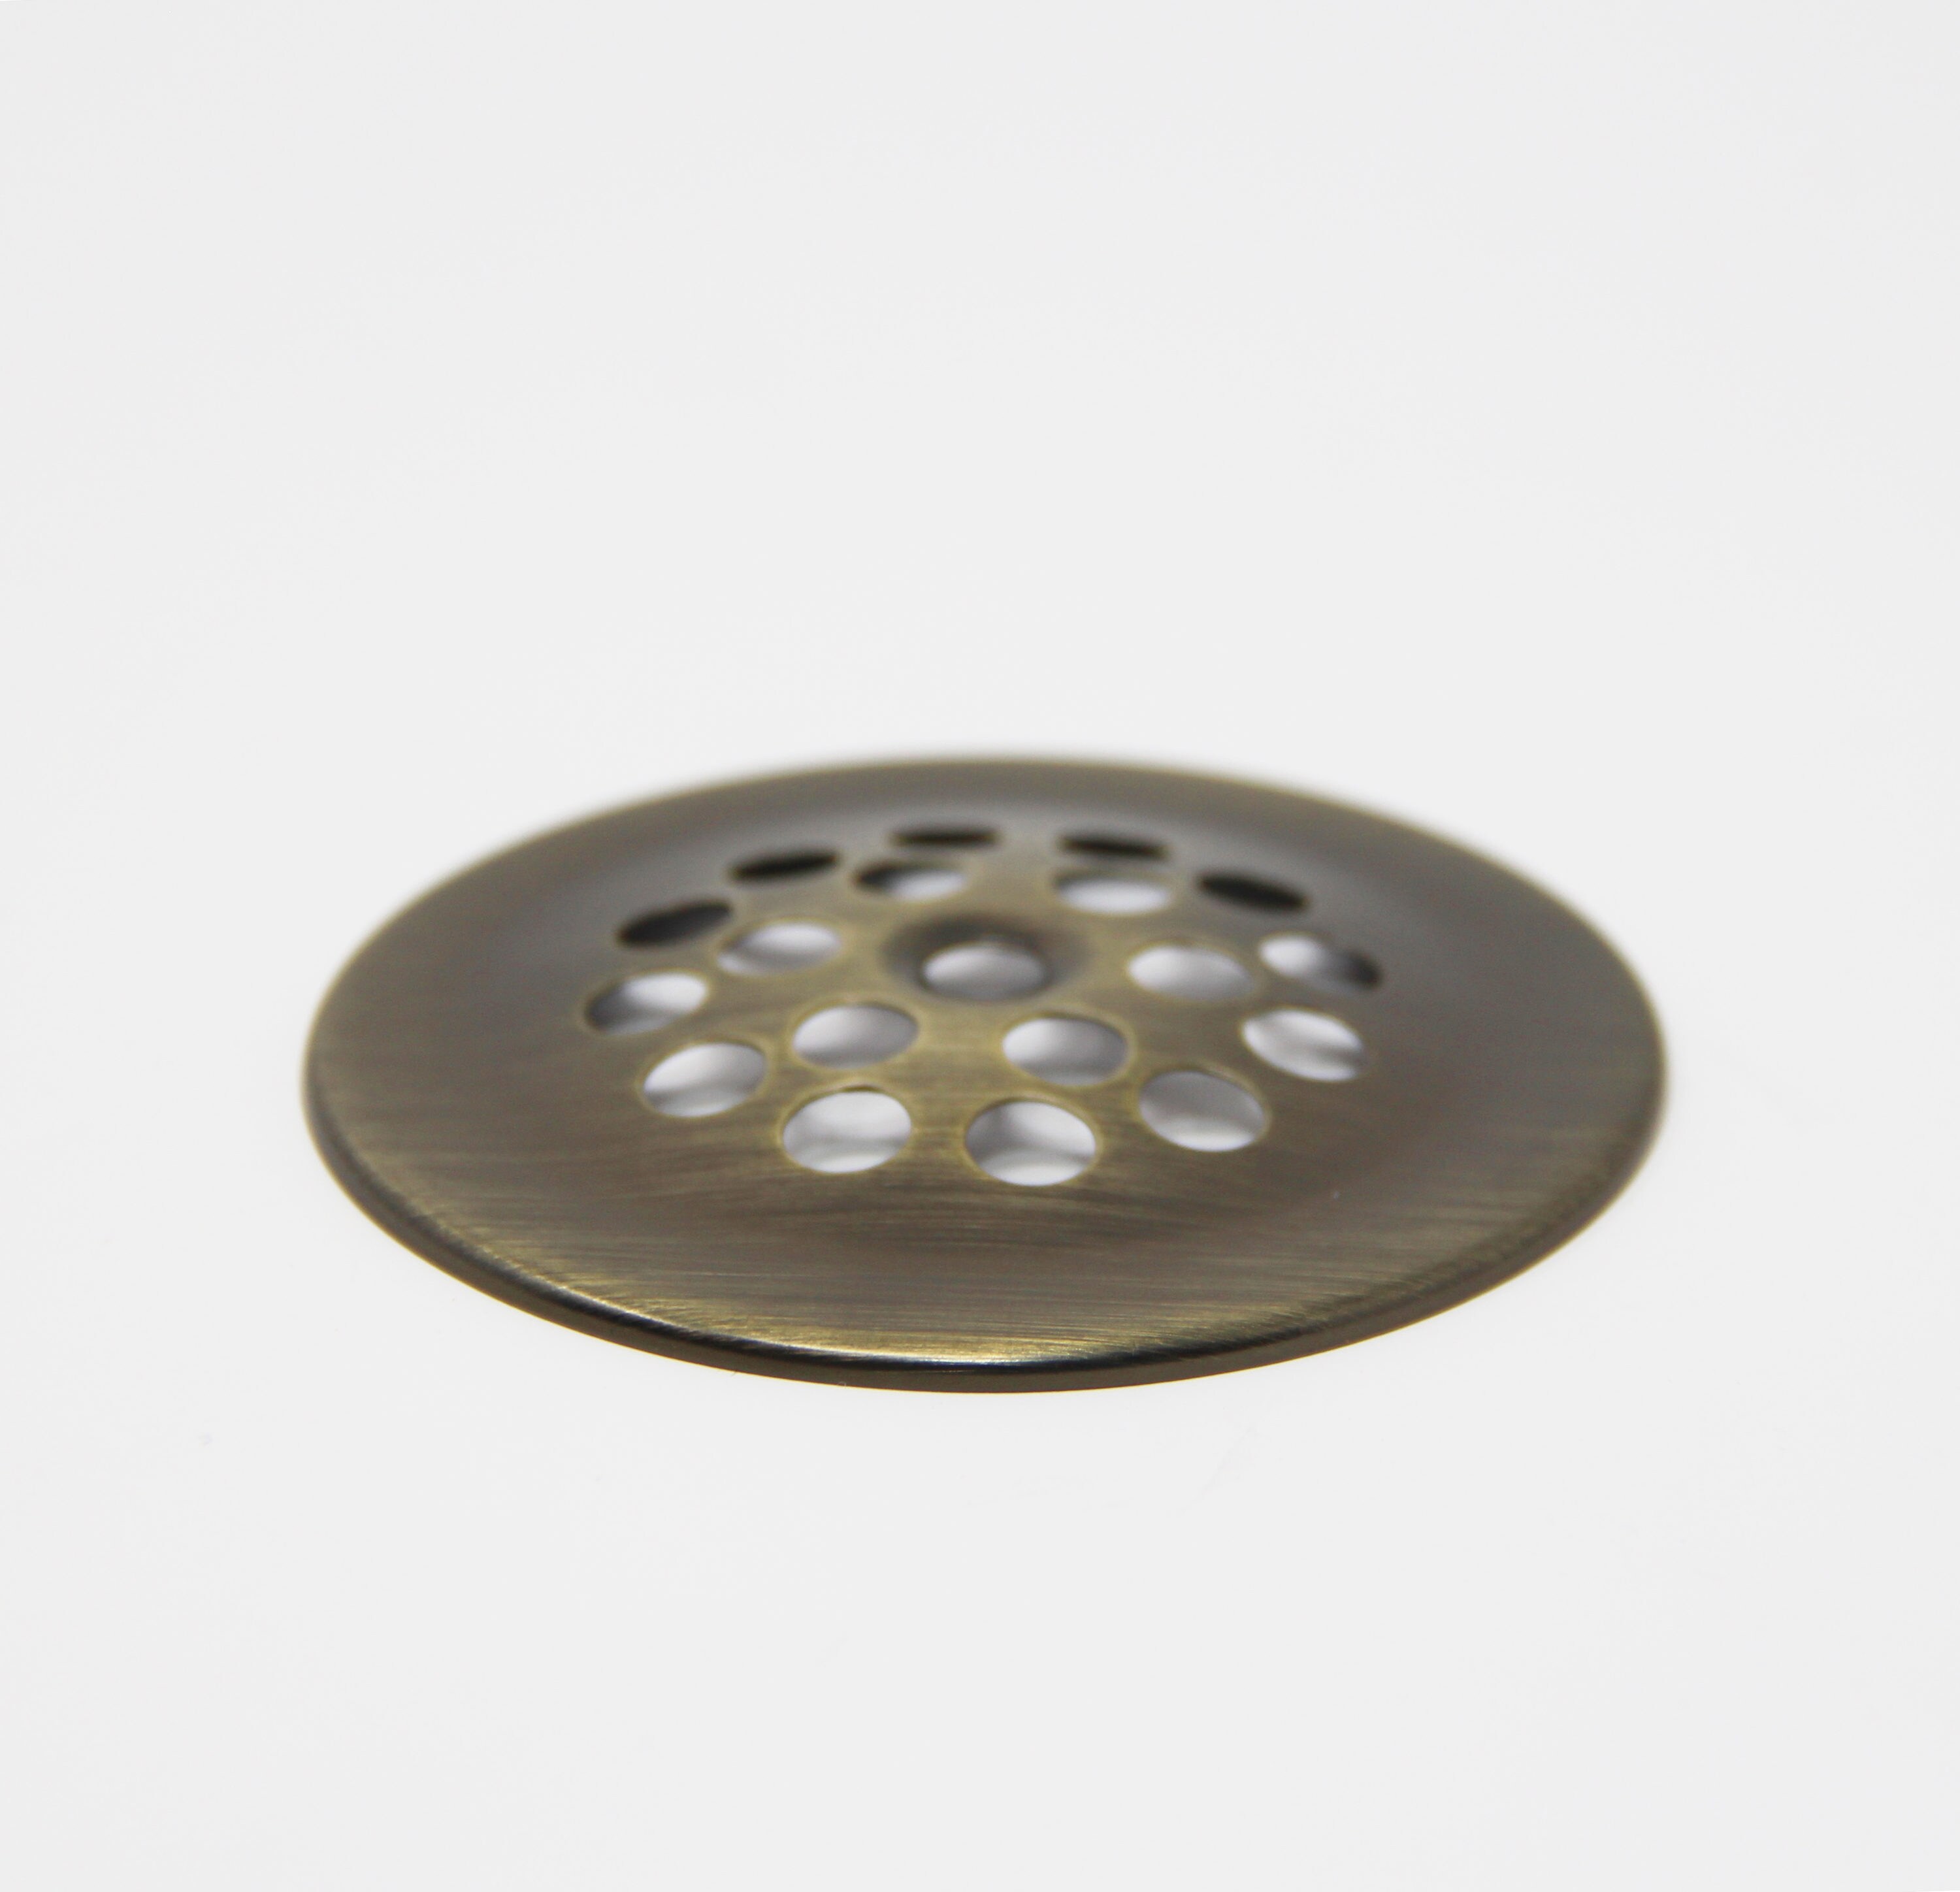 120mm chrome plated brass cover with 90mm diameter drain tube - ESPINOSA